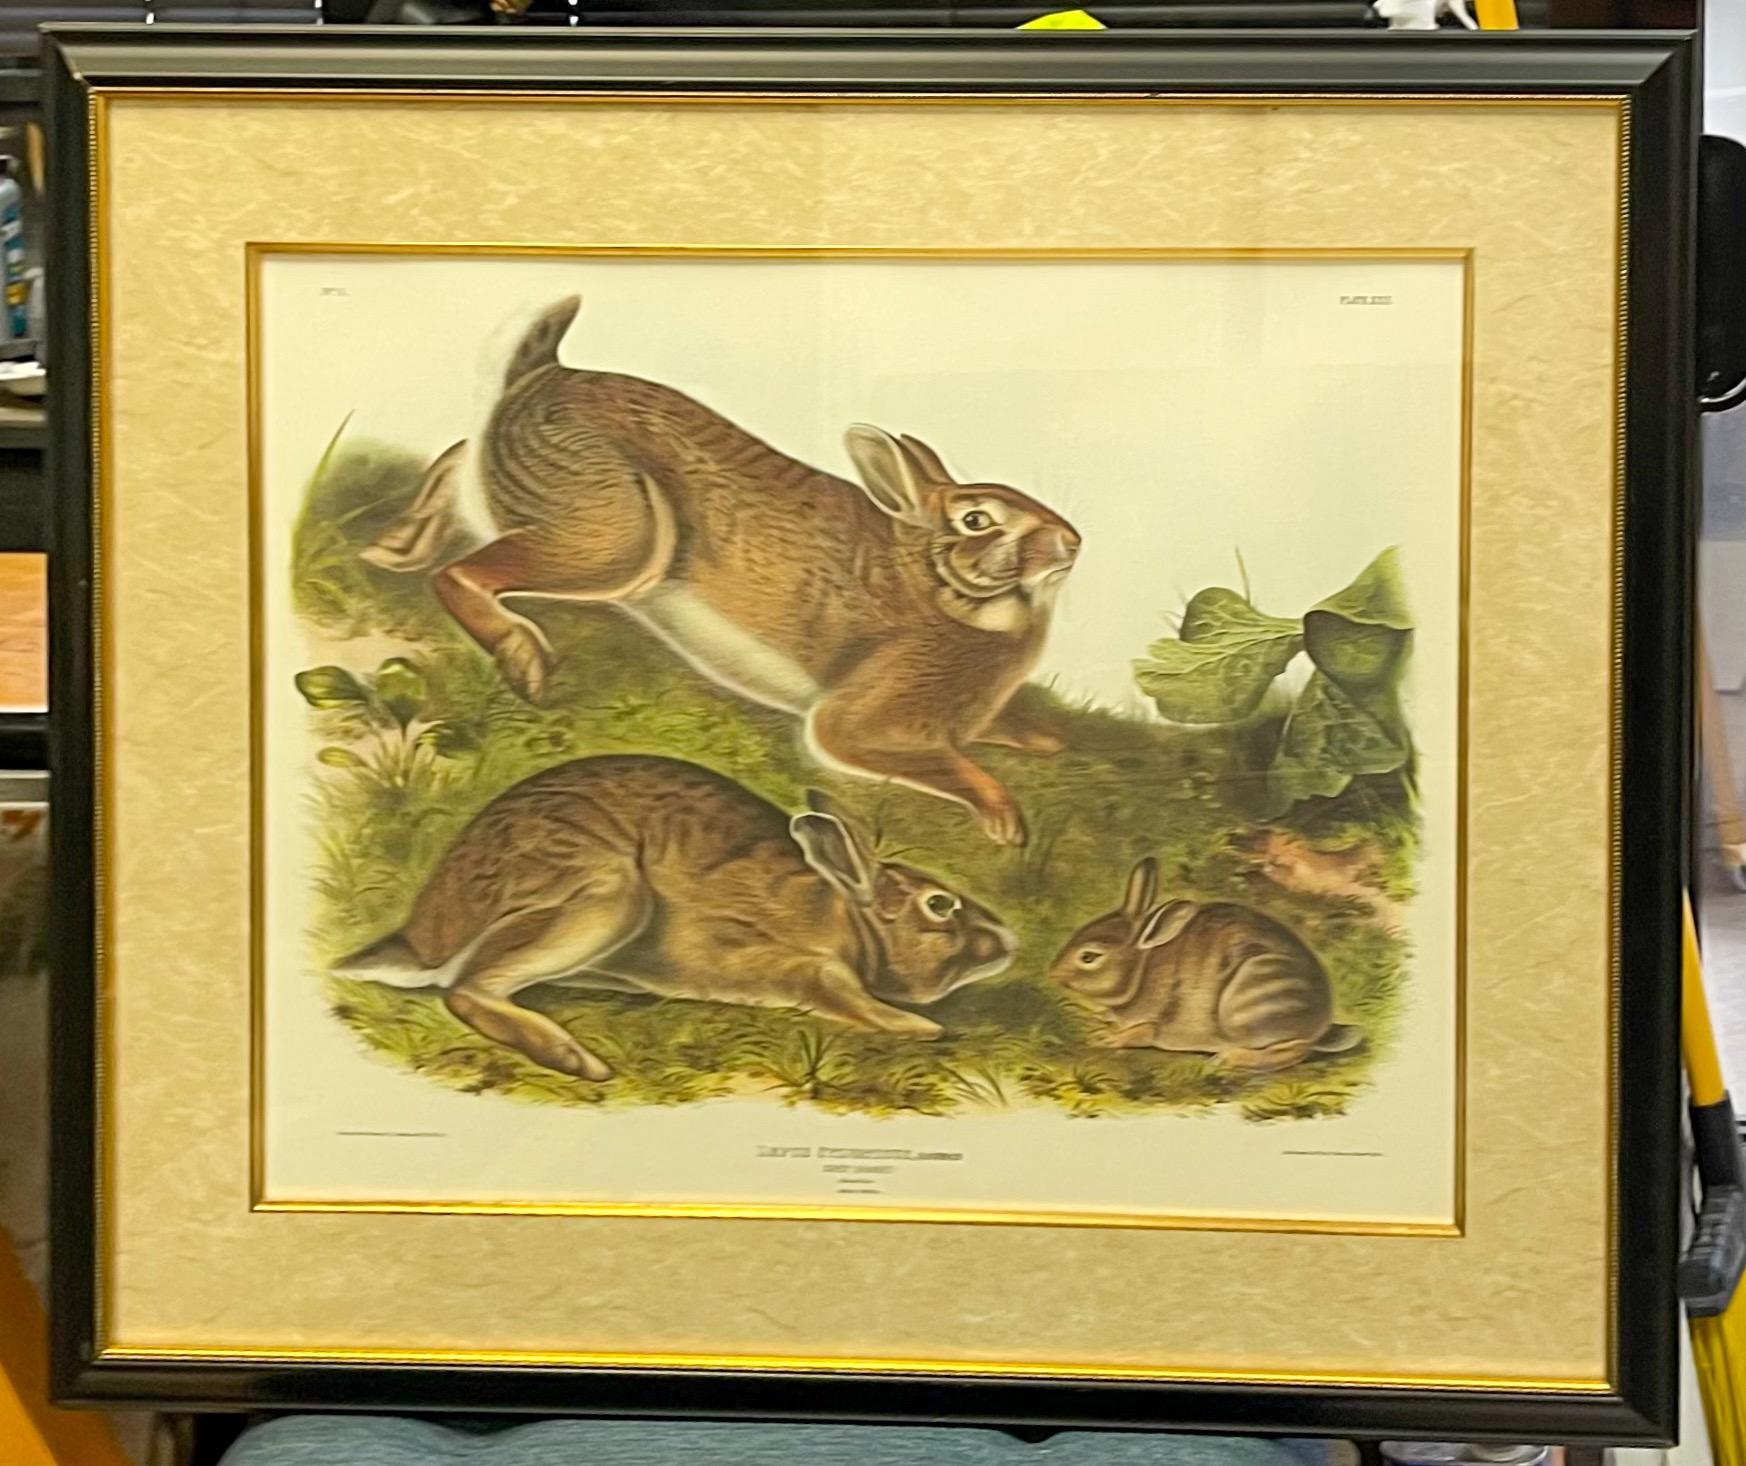 John James Audubon along with his son and friend the Reverend Bachman did one last trek to study the animals of North America. This is the grey rabbit from old to young. This is a hand colored lithograph of Audubon’s work done by the renowned